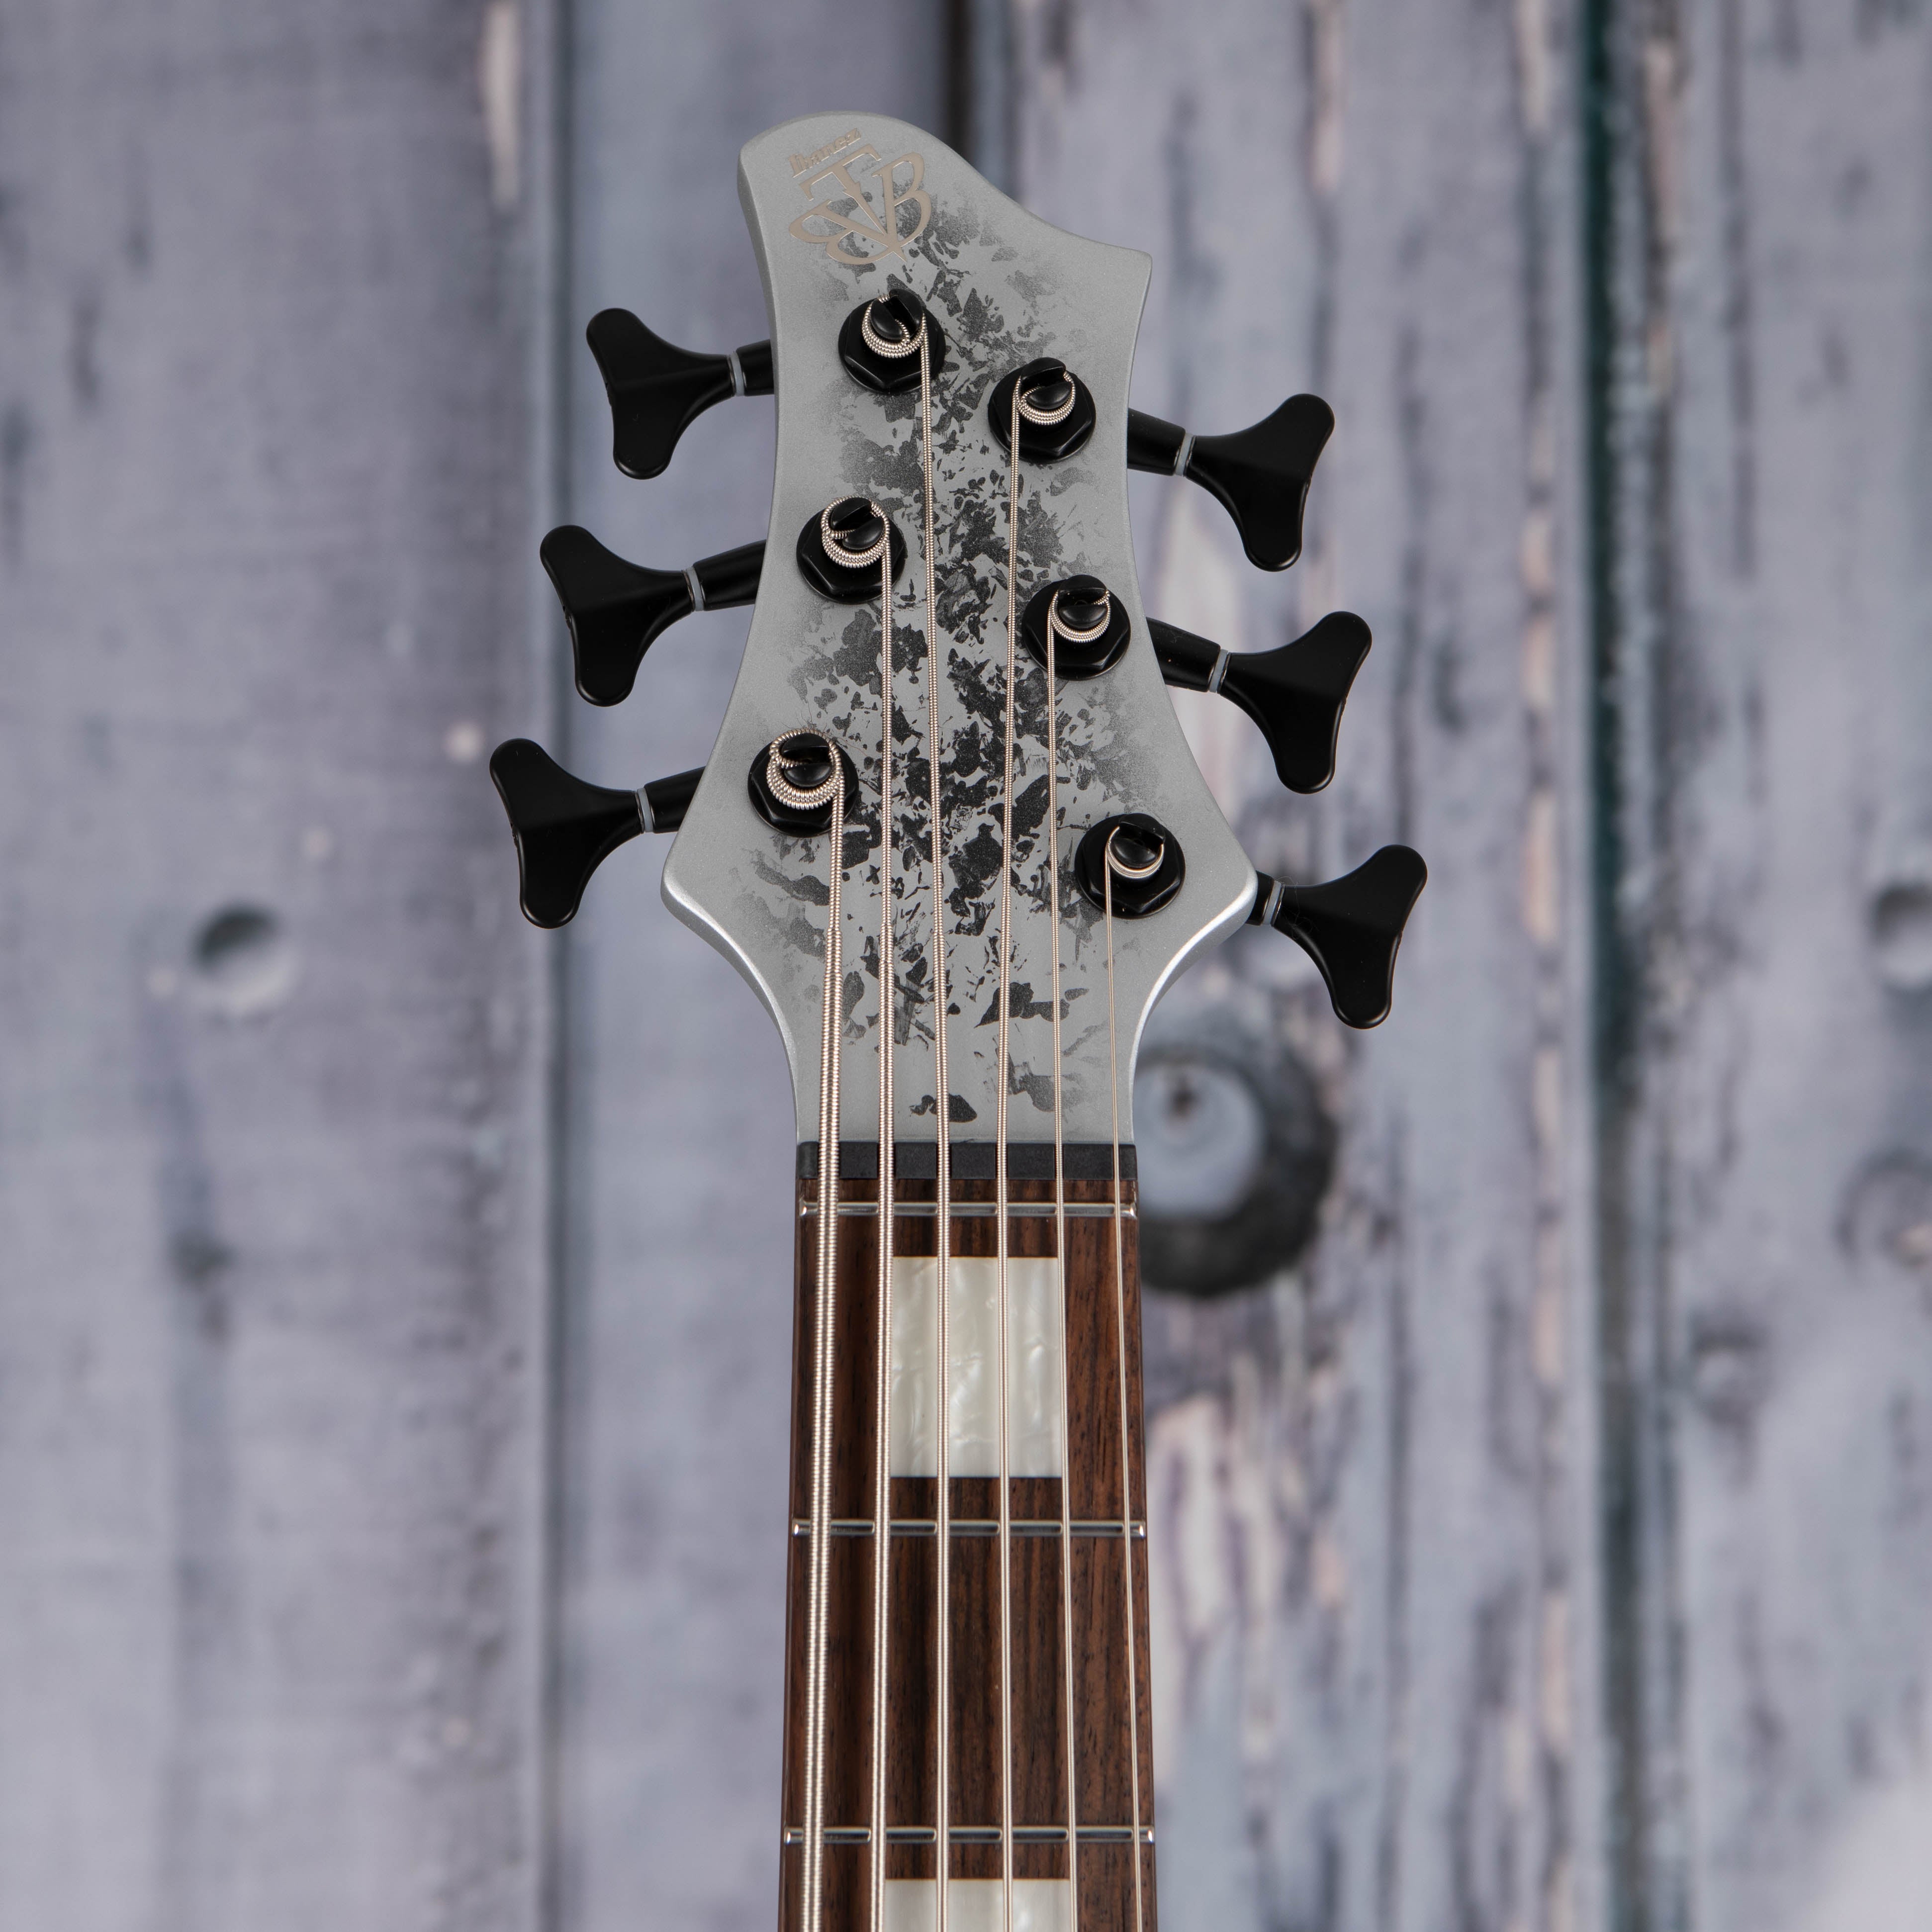 Ibanez BTB25TH6 25th Anniversary BTB Standard 6-String Electric Bass Guitar, Silver Blizzard Matte, front headstock